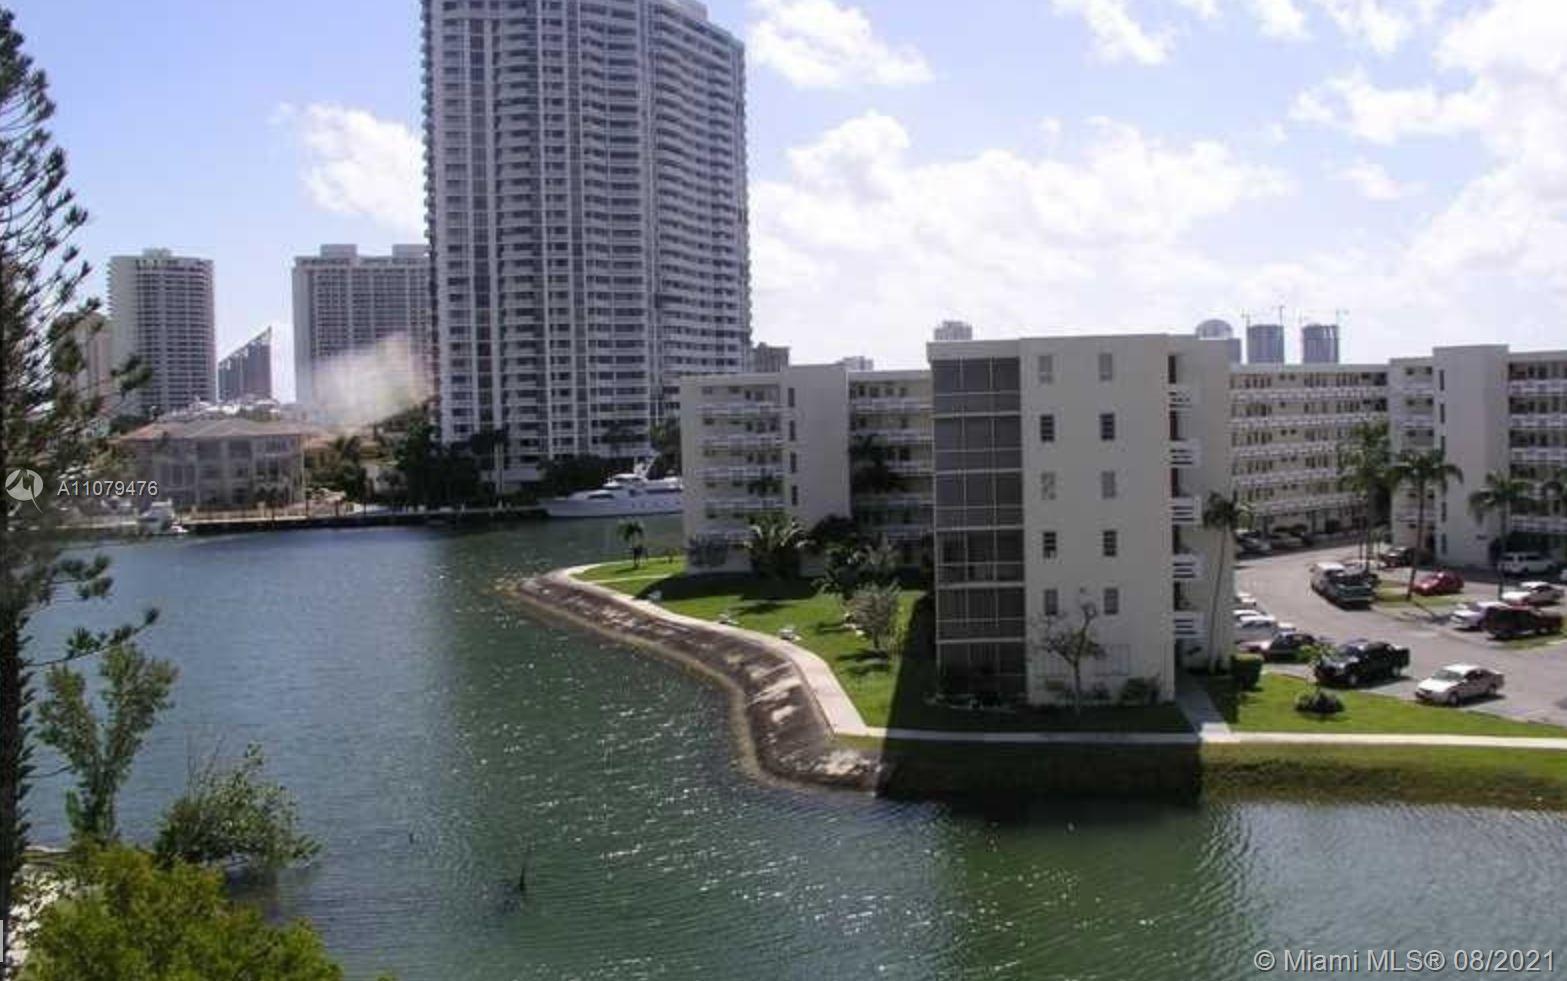 Enjoy beautiful views of the lake and million dollar boats cruising the intracoastal from this 1/1, 